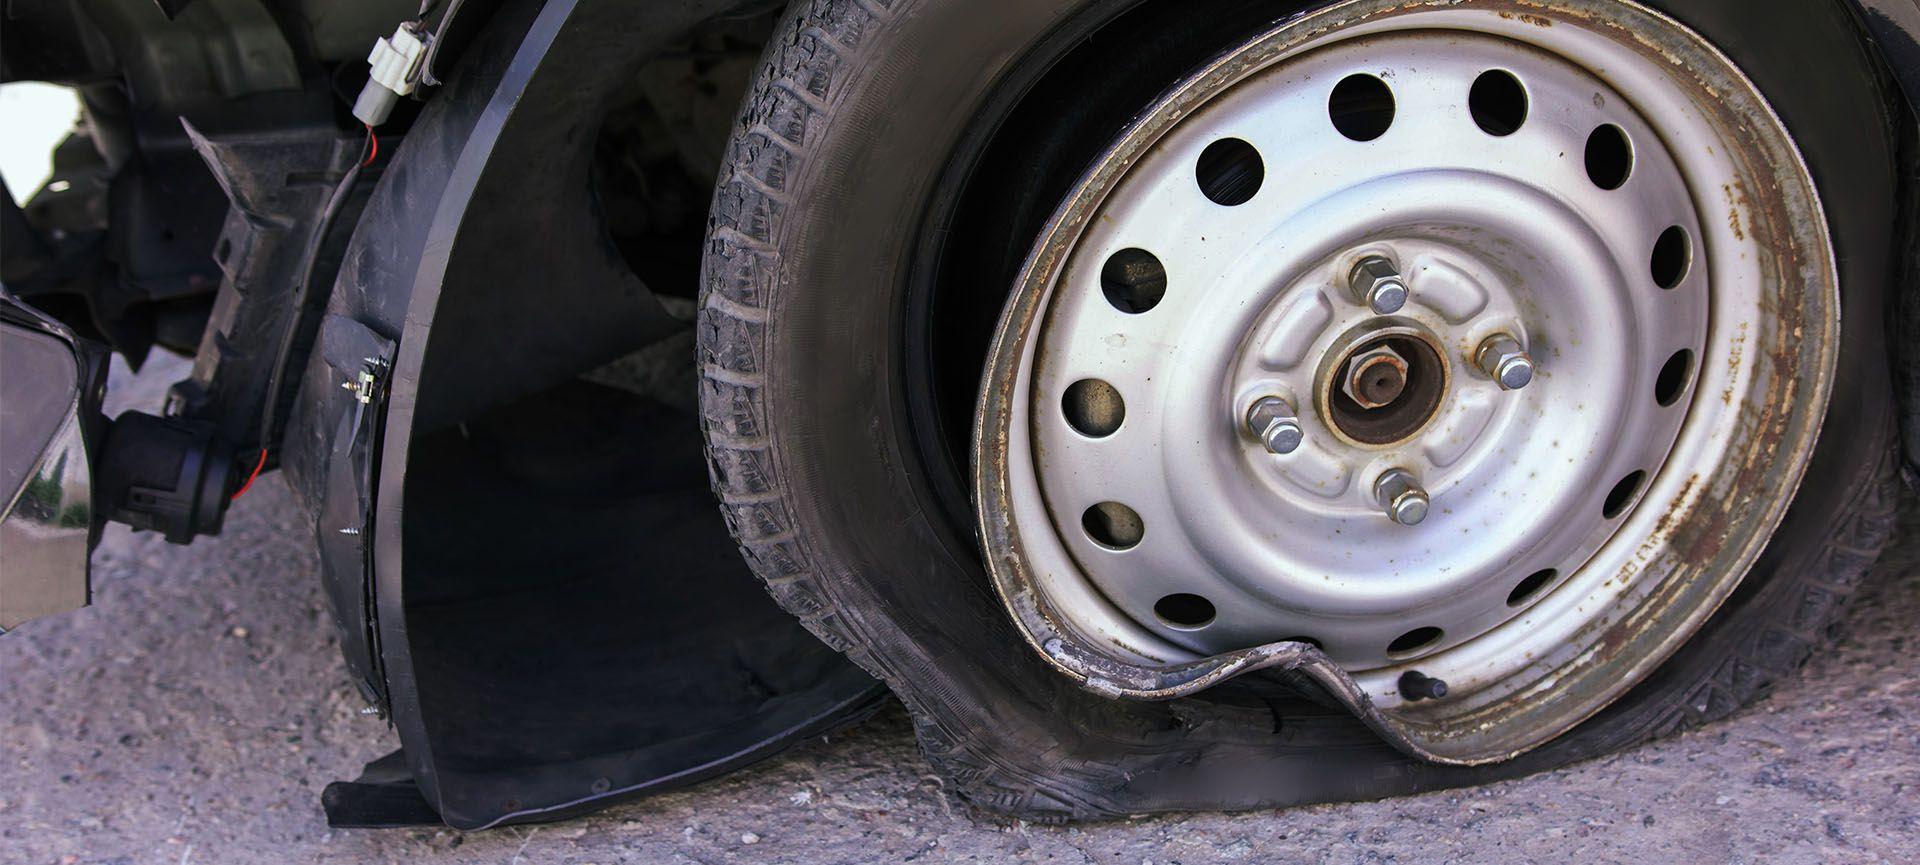 Common Types of Rim Damage and How to Identify Them